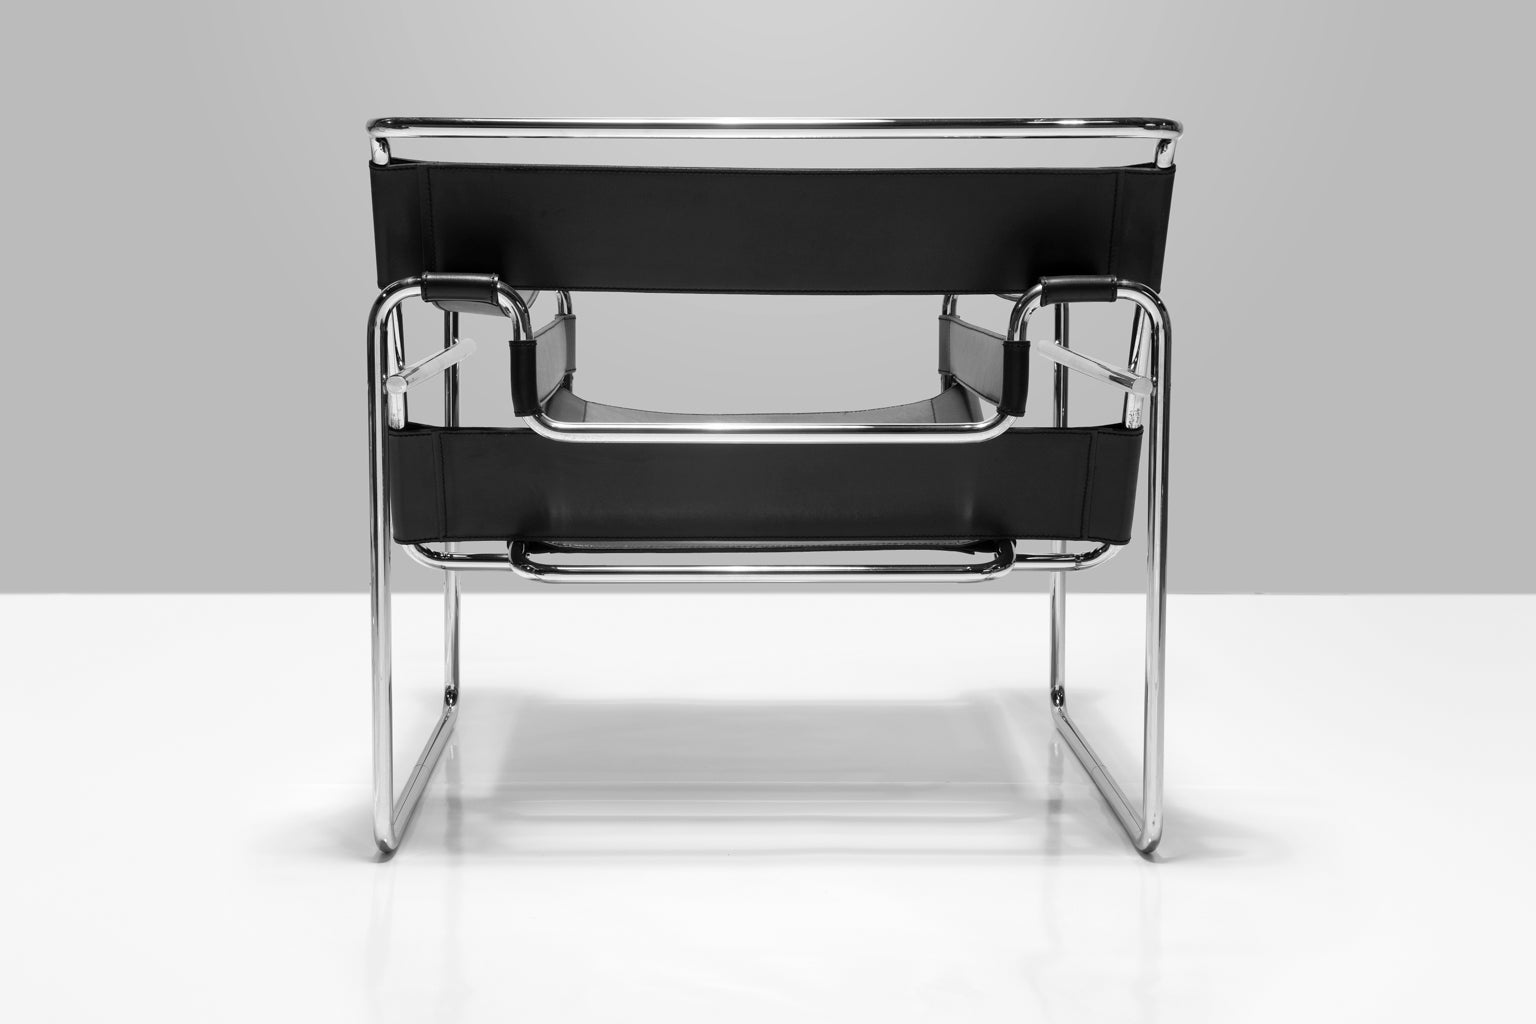 Wassily Club Chair by Marcel Breuer designed in 1925 - 26 for Knoll also known as the Model B3 chair. Breuer designed this chair while he was the head of the cabinet-making workshop at the Bauhaus, in Dessau, Germany. These chairs are in excellent